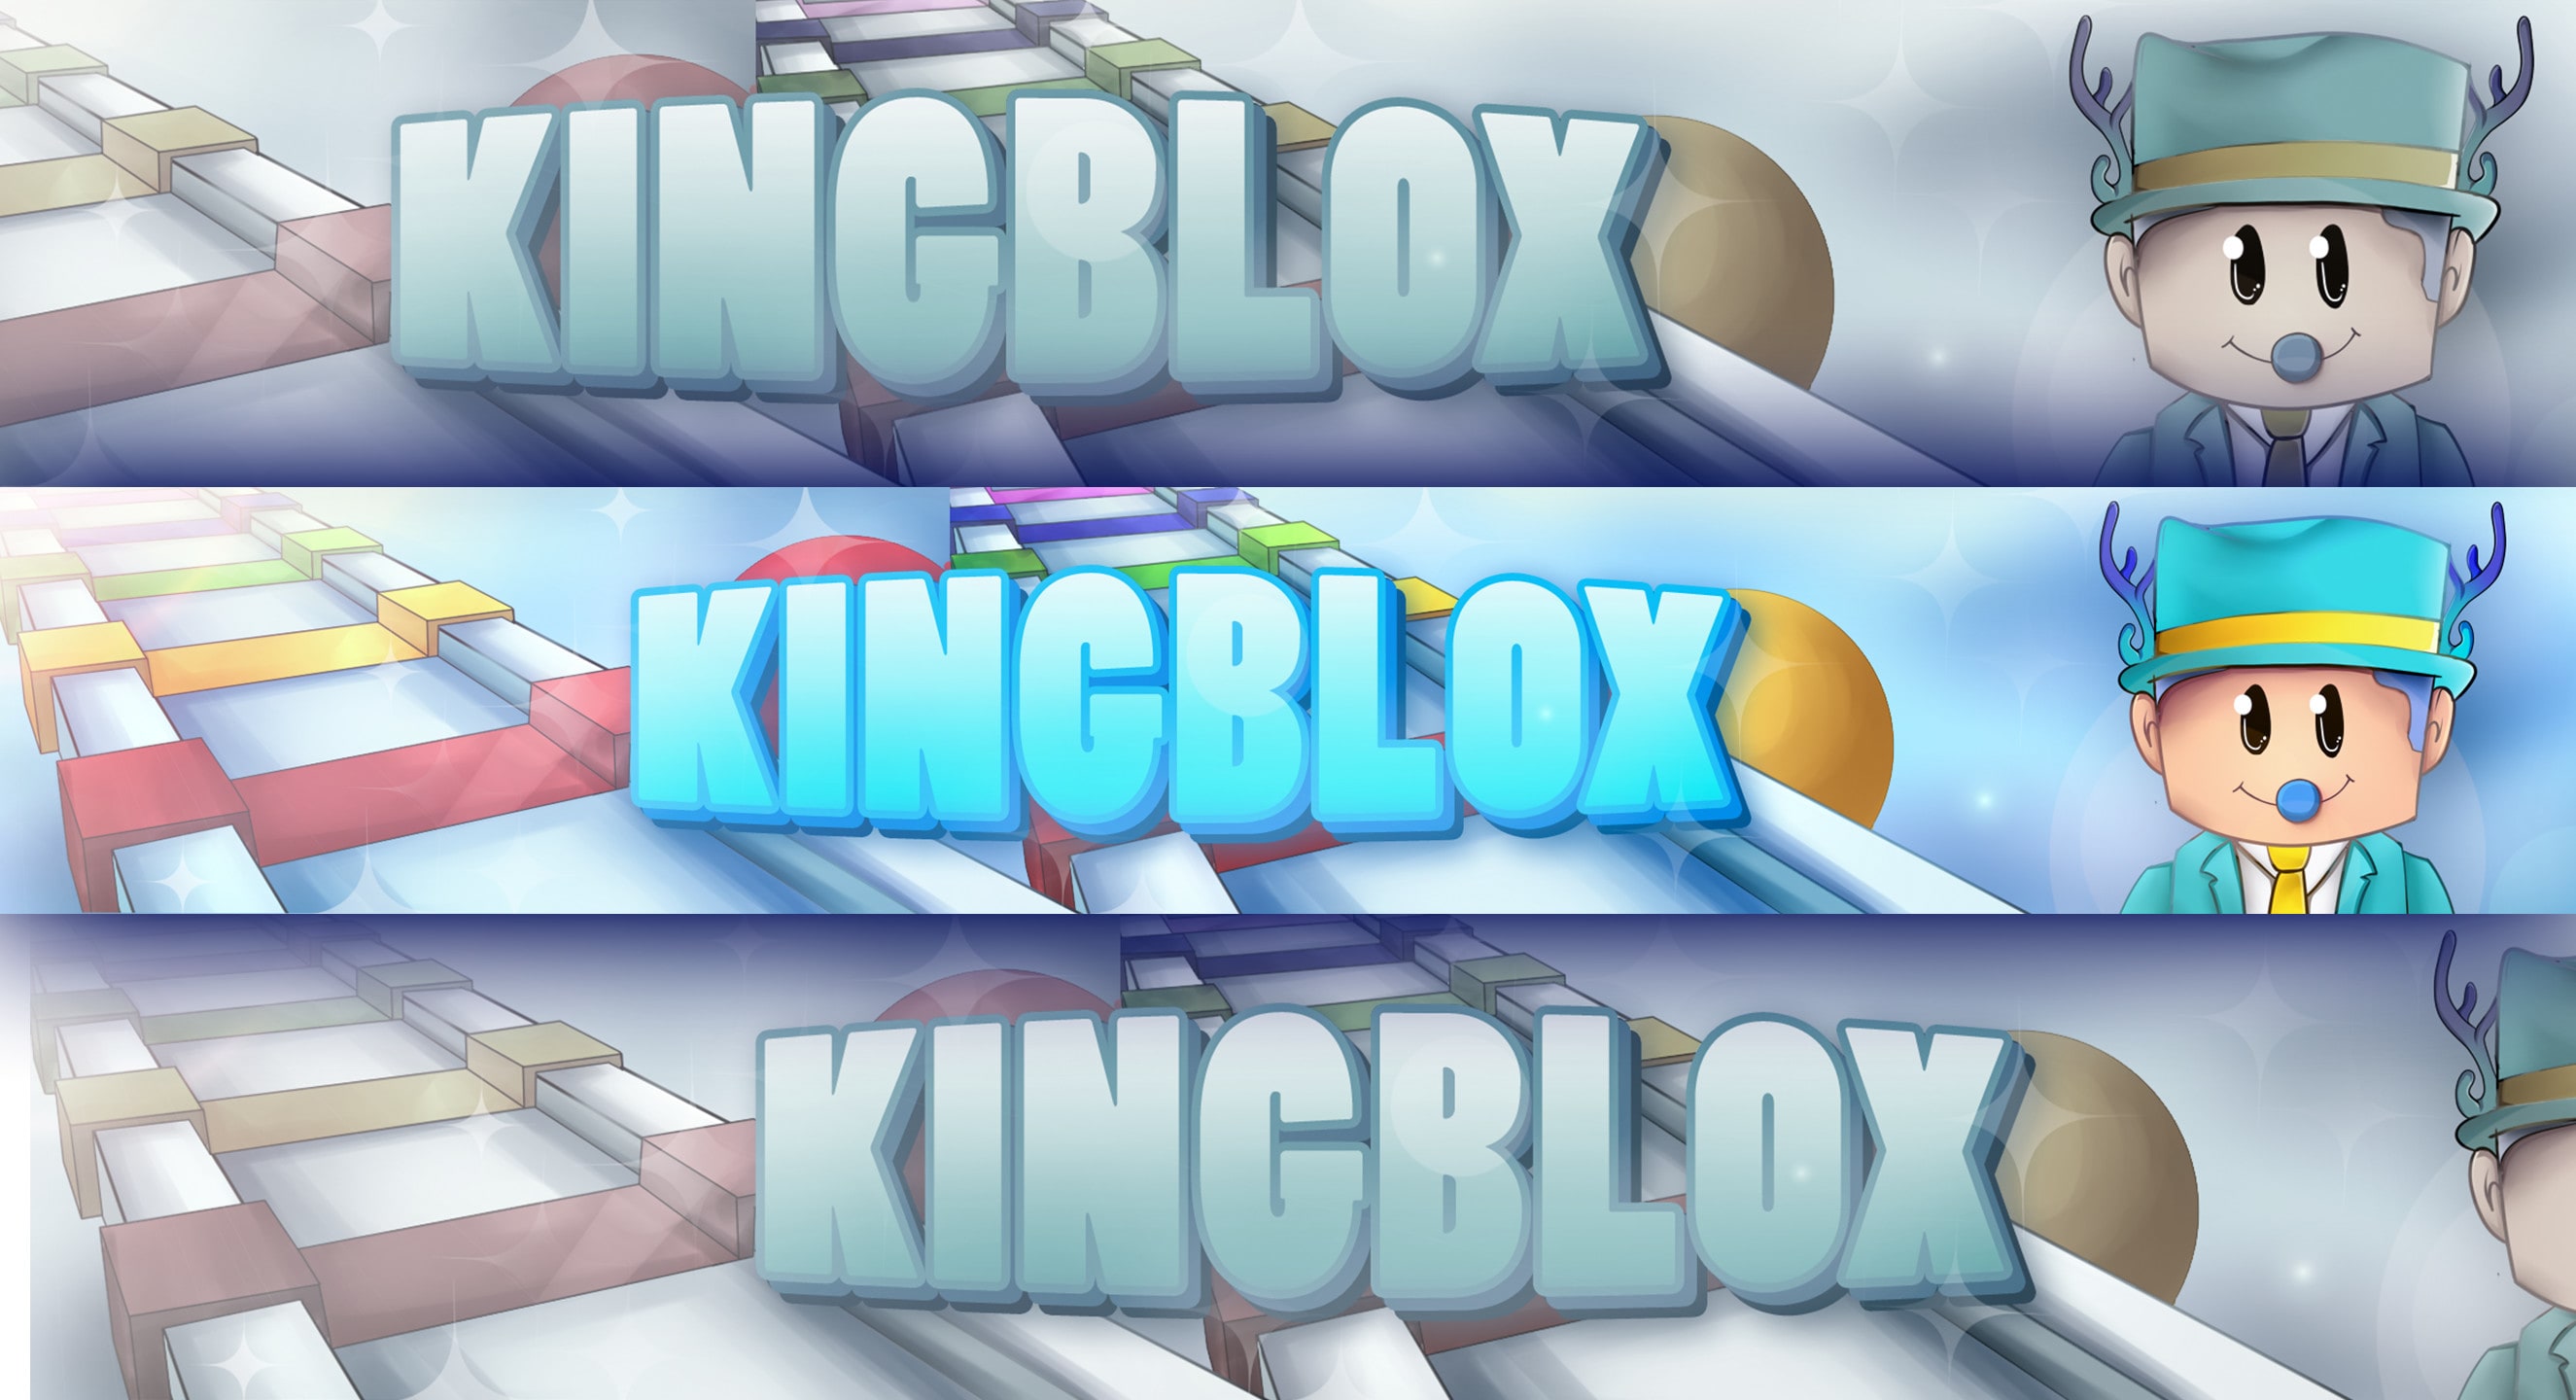 Design A Banner Digitally For Your Roblox Or Minecraft Character By Amazingrocker Fiverr - imagenes de roblox 2048 x 1152